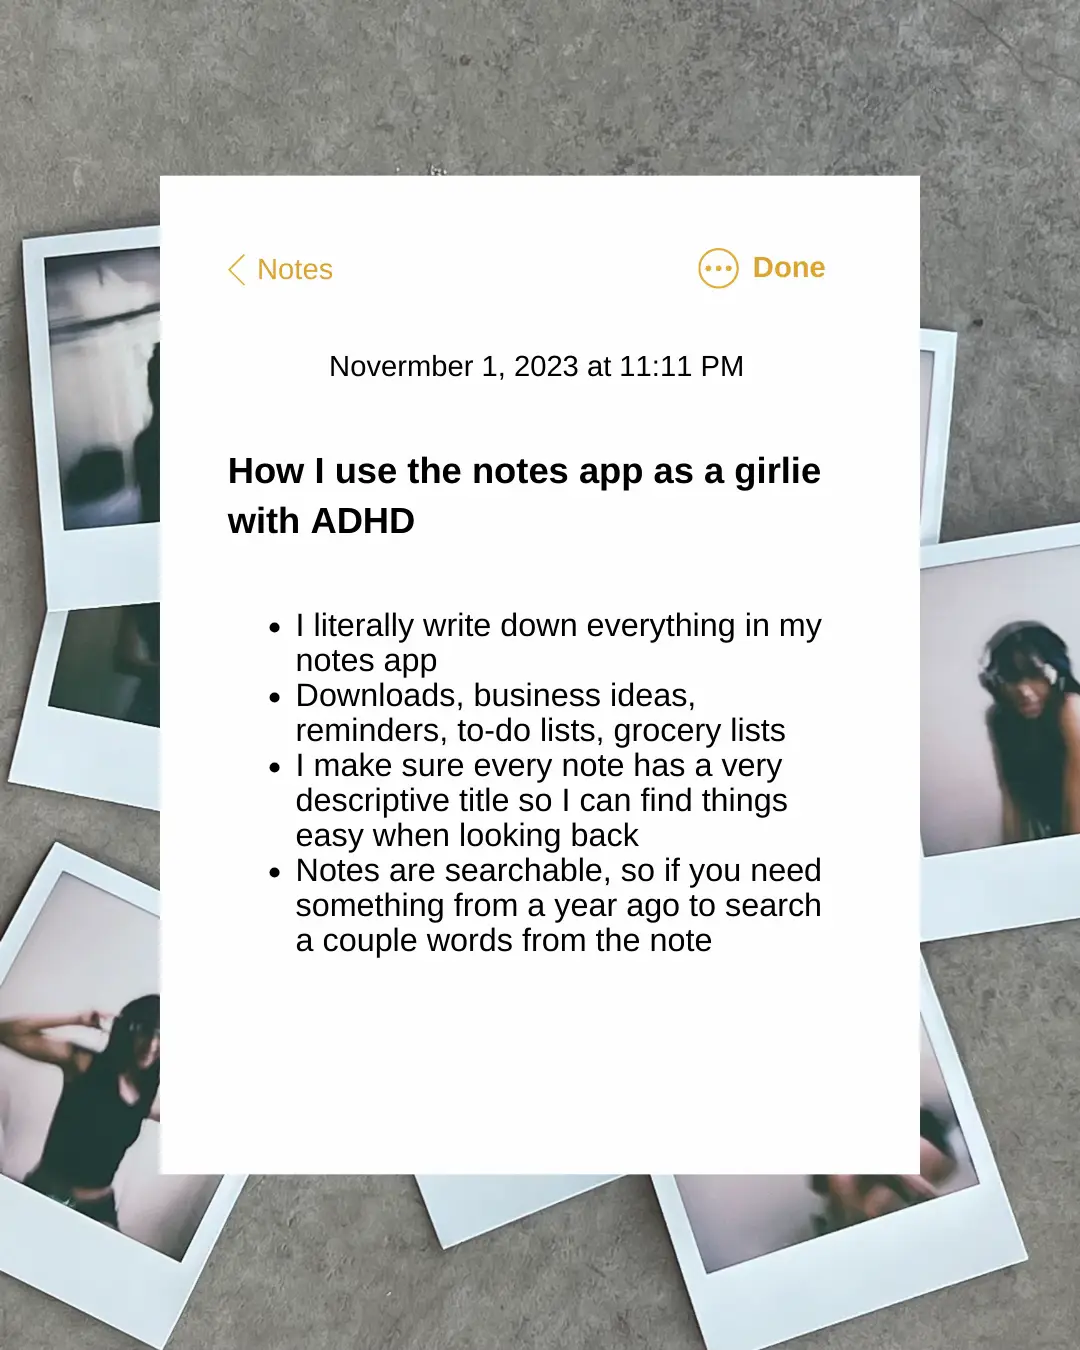 Apple Notes Tips & Tricks 📲, Gallery posted by Inna Dinkins